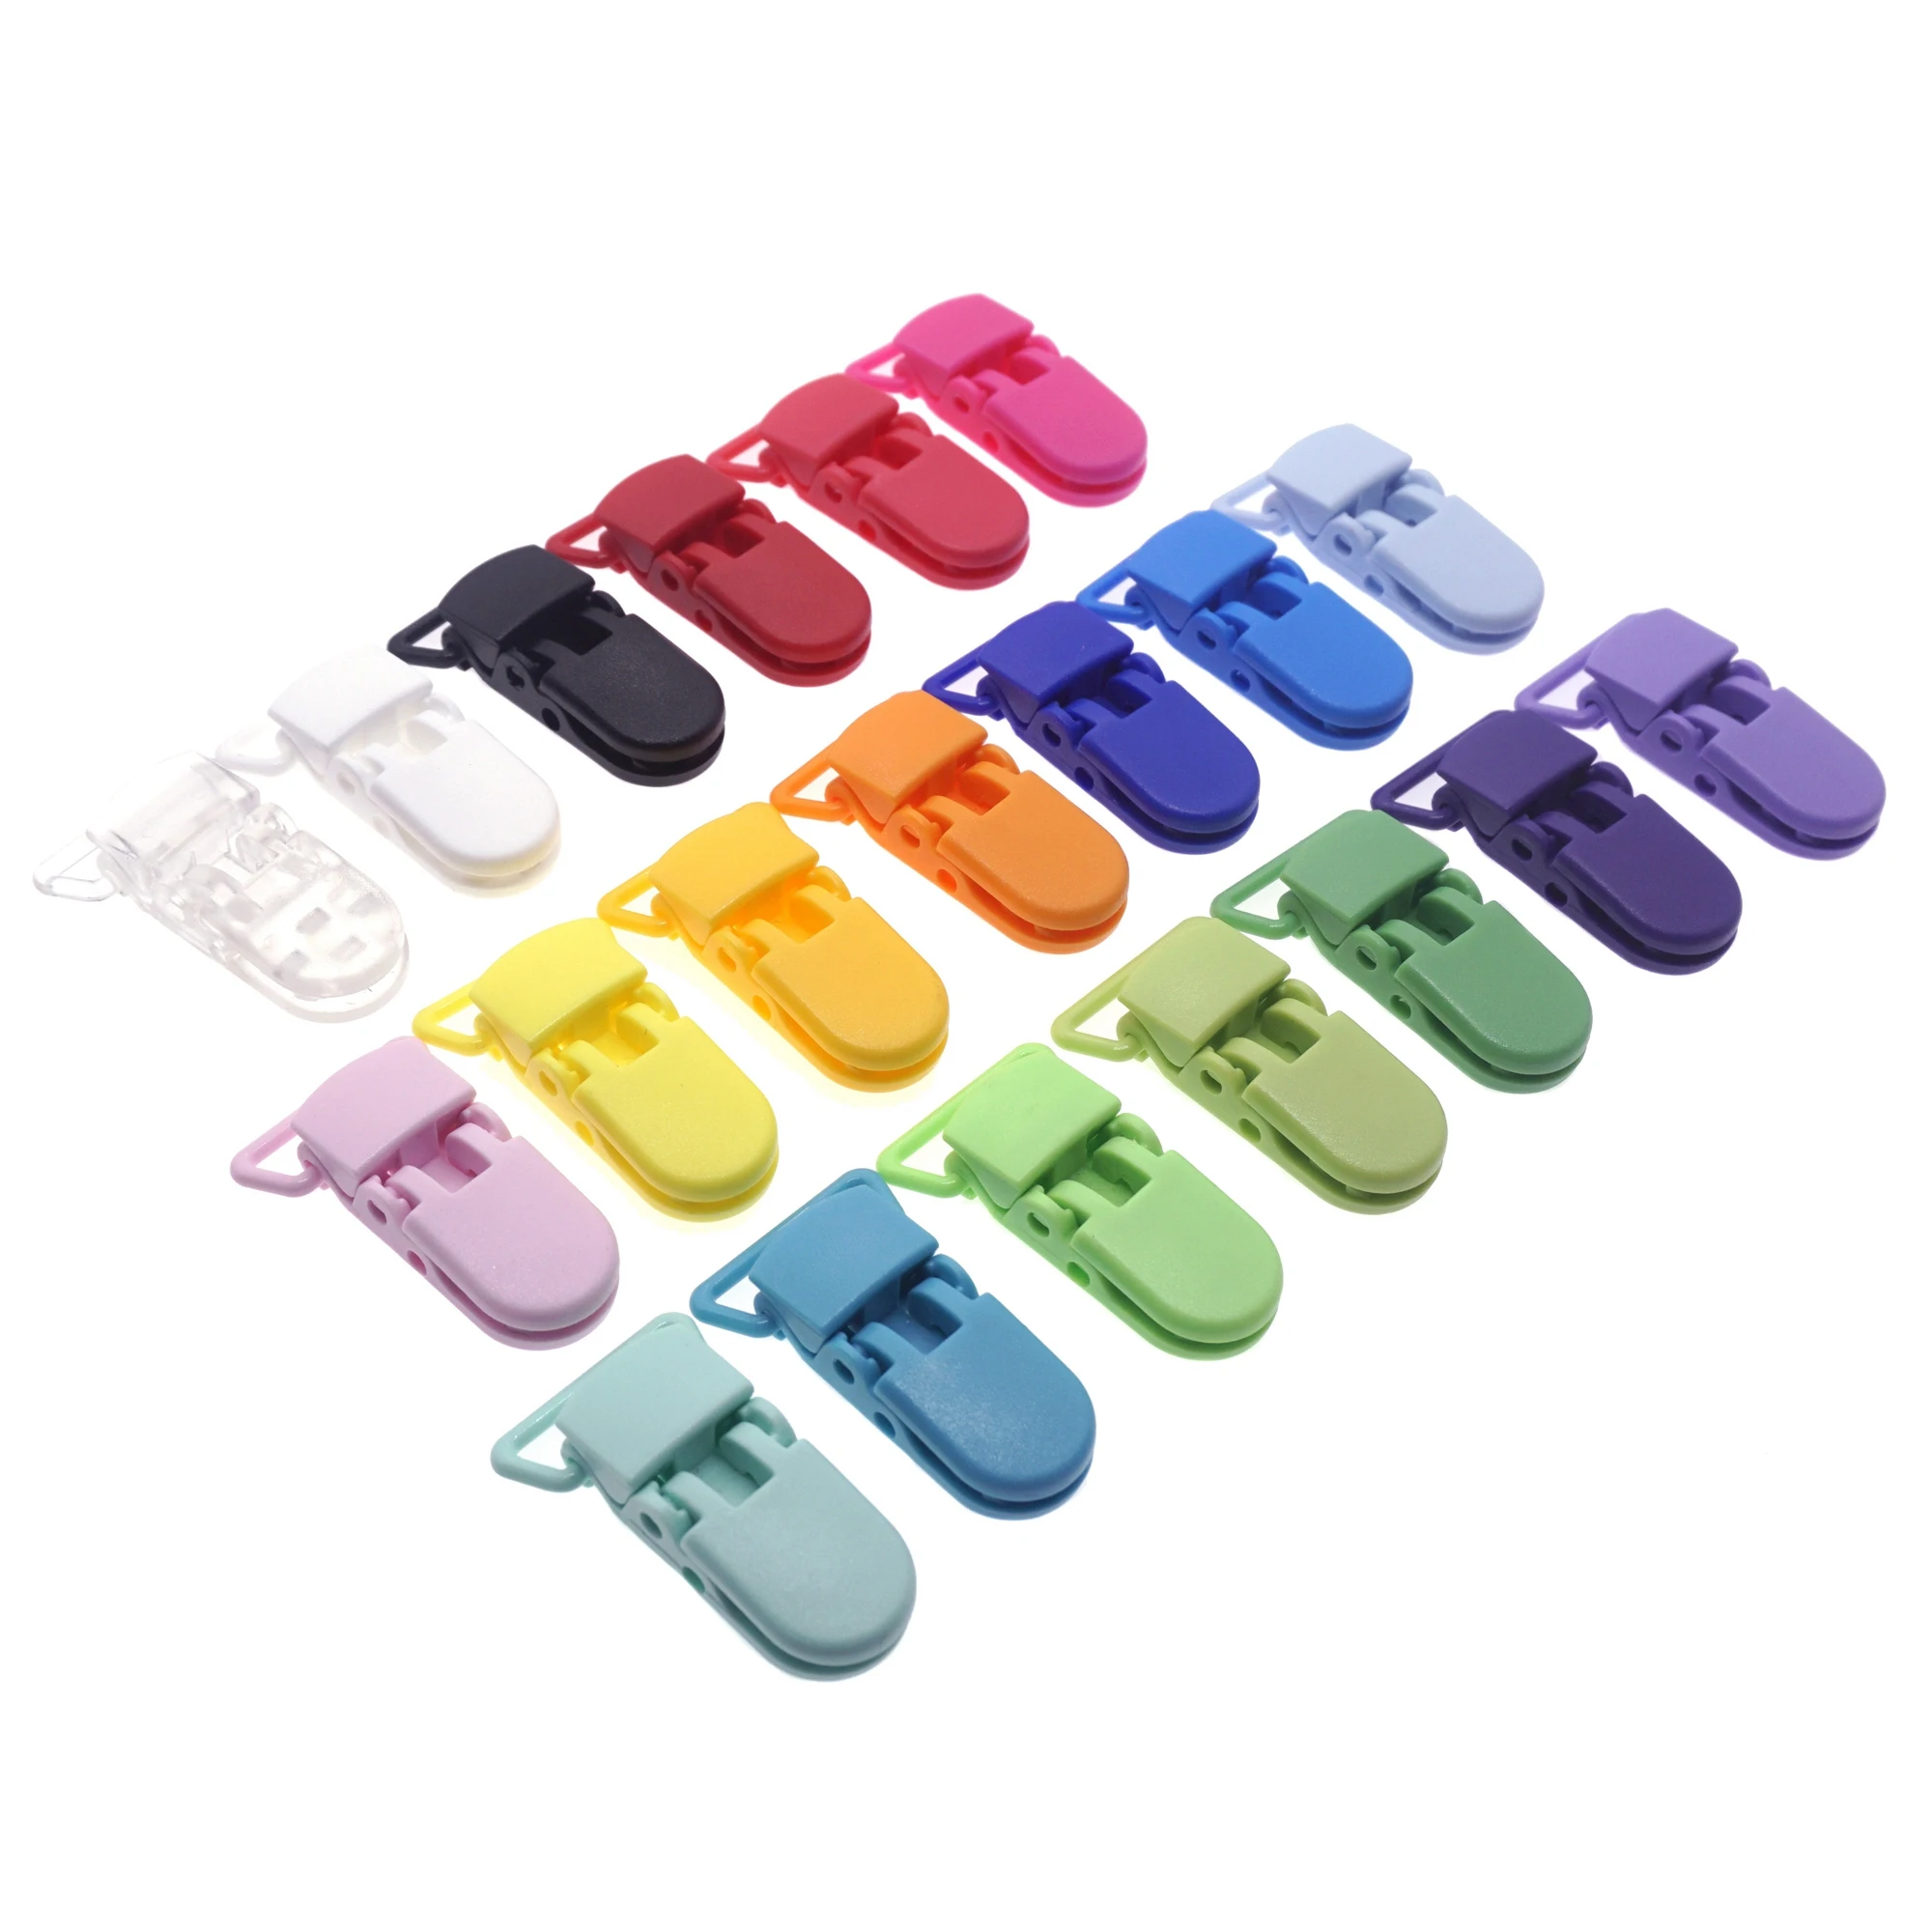 sutoyuen-200pc-mix-20-colors-20mm-kam-d-shape-plastic-pacifier-clips-plastic-clamp-soother-dummy-baby-teether-toys-chain-holder